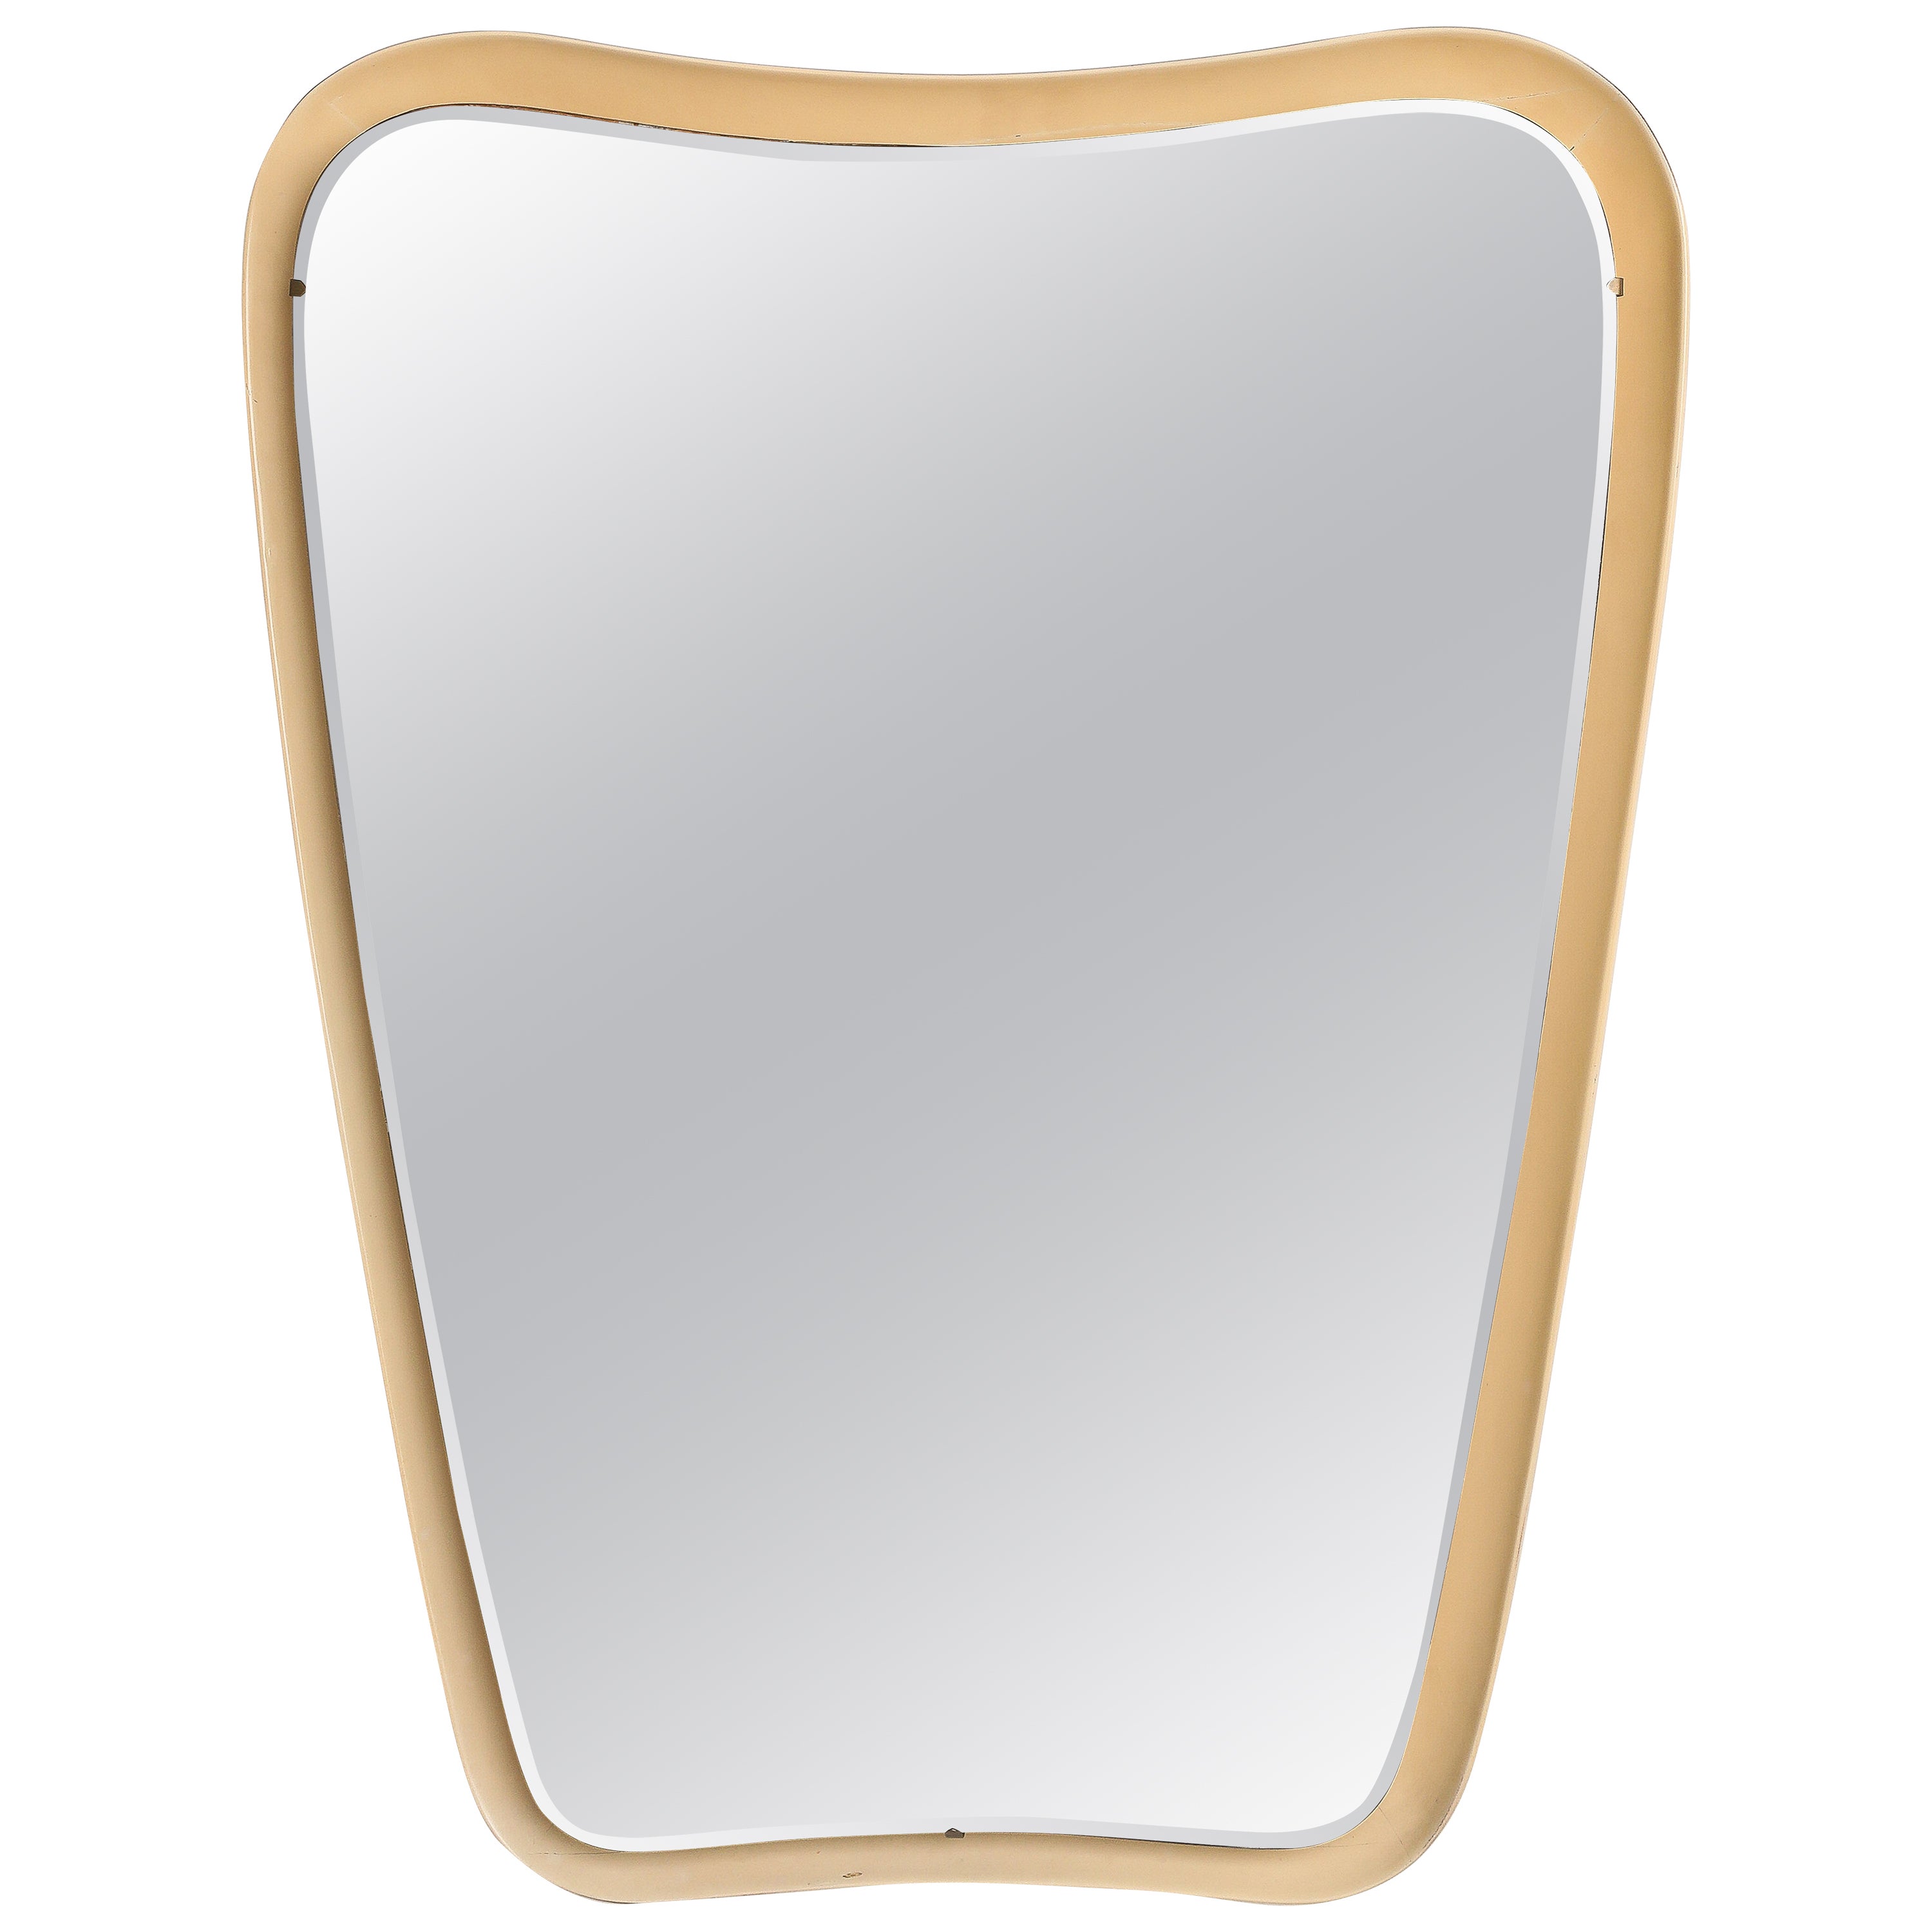 Italian Modernist Lacquered Floating Wall Mirror, Italy, circa 1960 